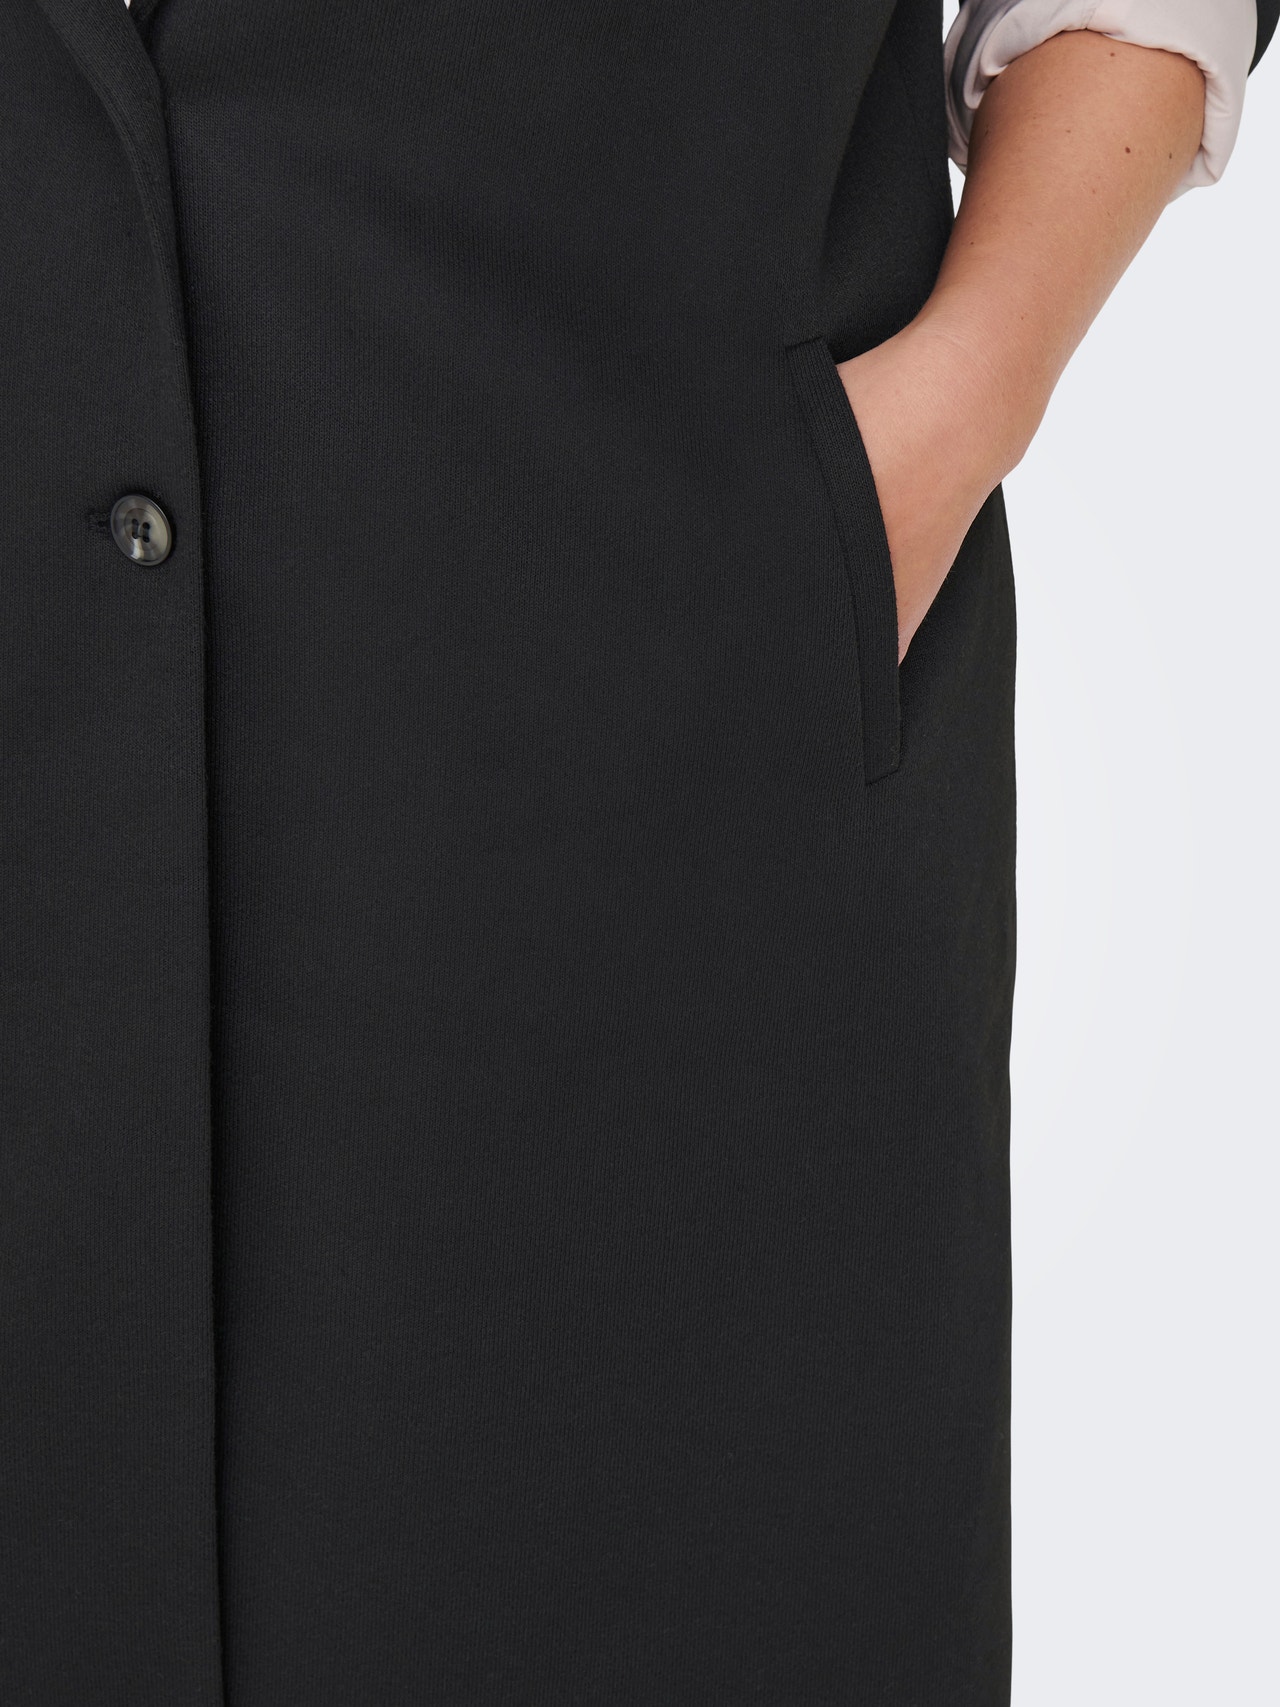 ONLY Curvy solid colored coat -Black - 15245964